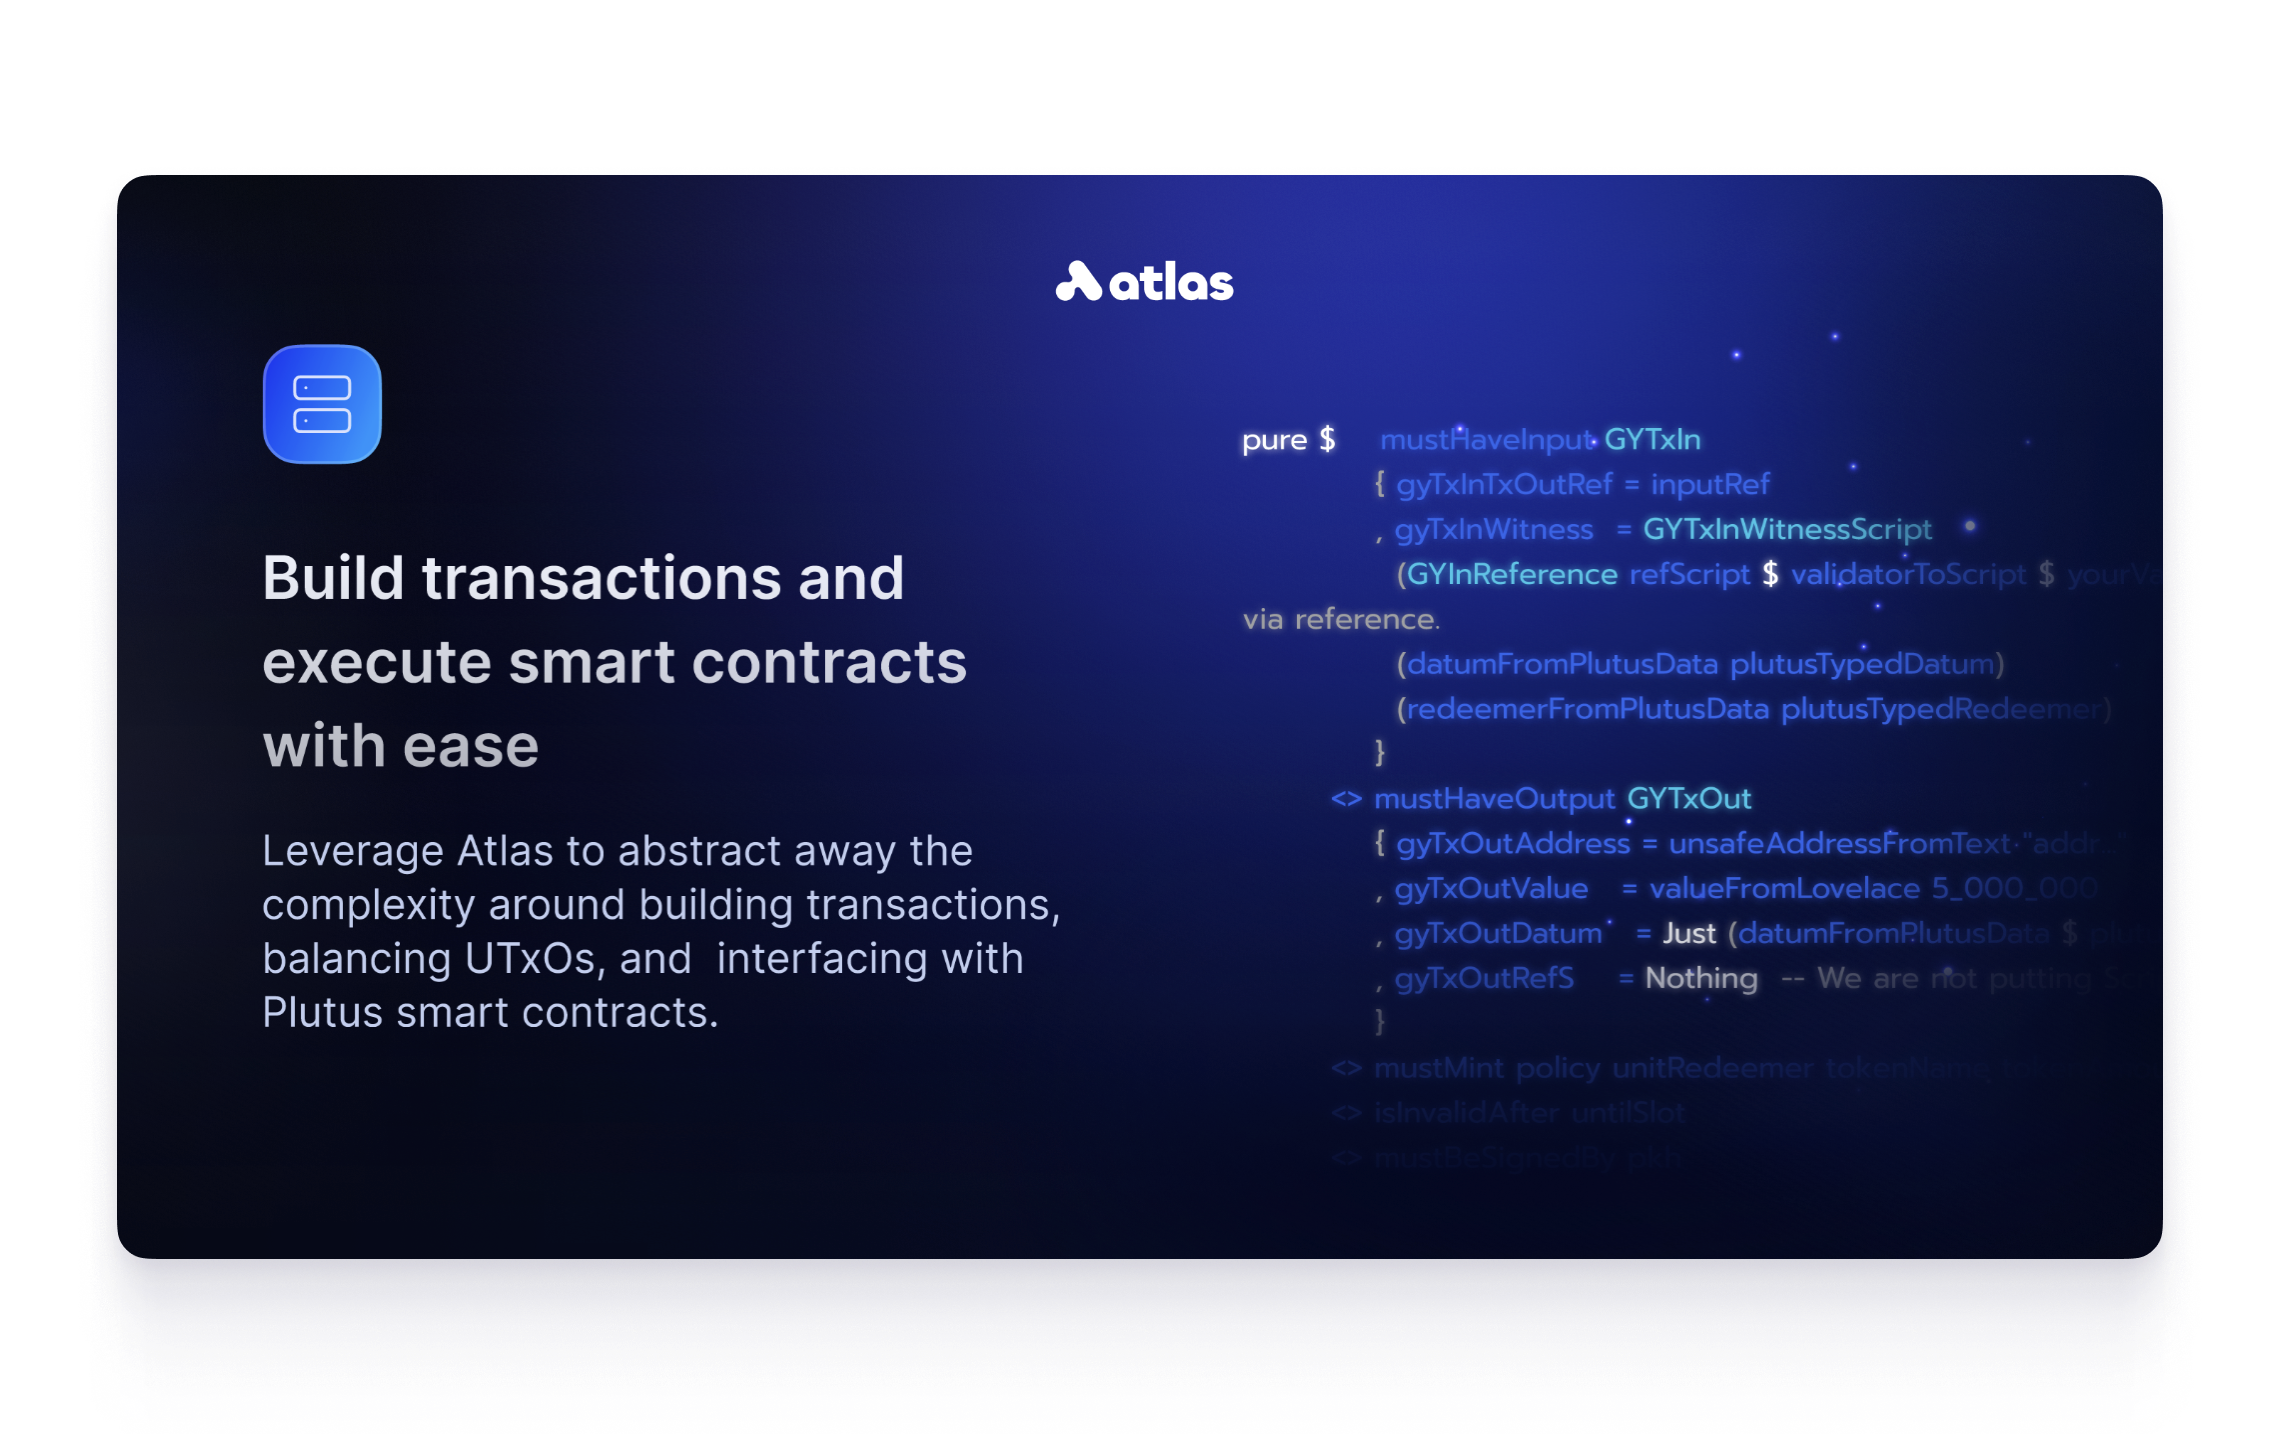 Atlas - build transactions and execute smart contracts with ease